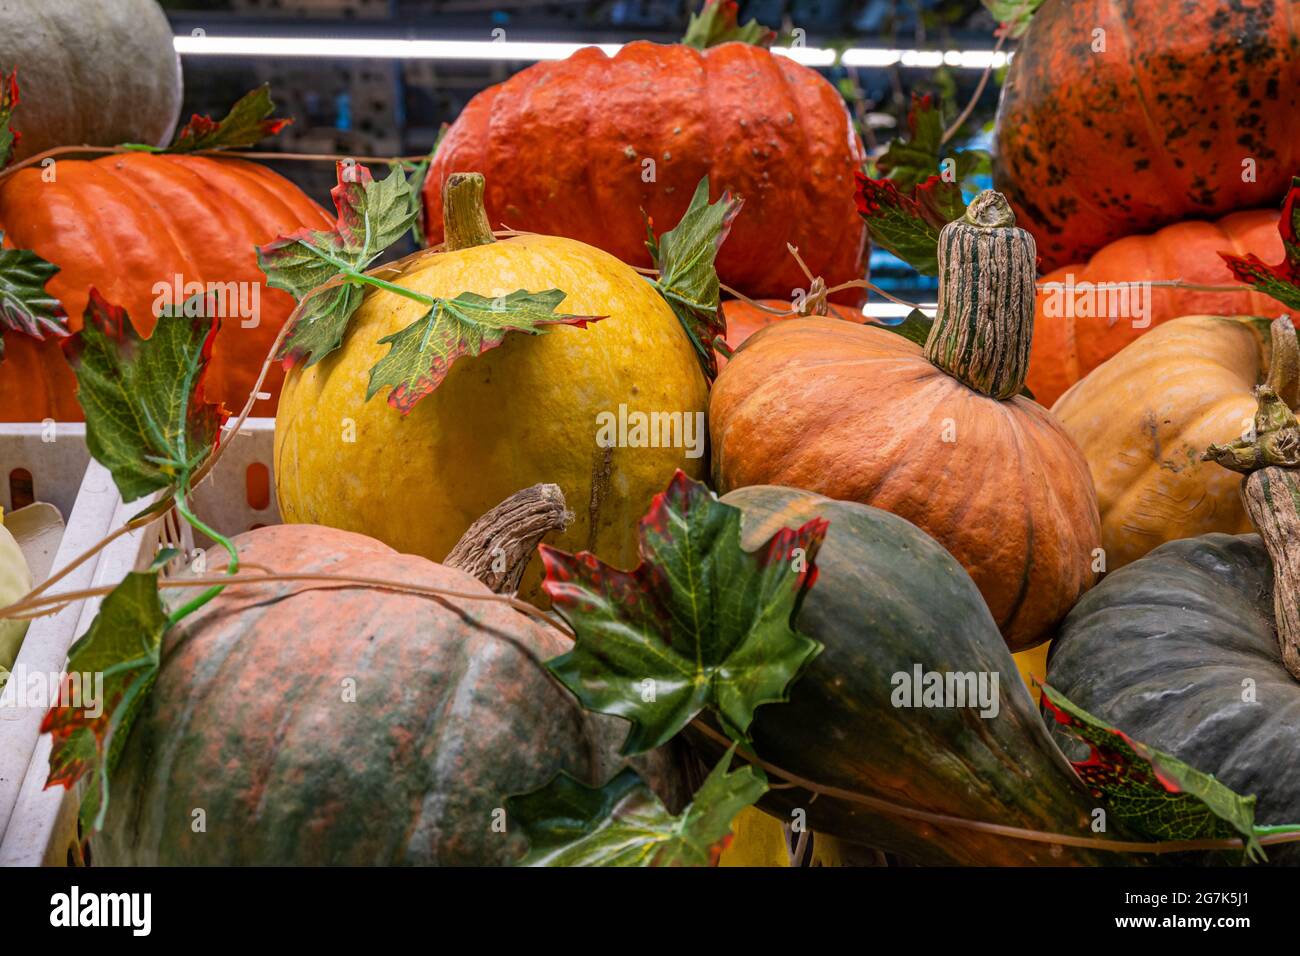 A pile of pumpkins, a stall with a ripe pumpkin close-up at a farmer's market Stock Photo